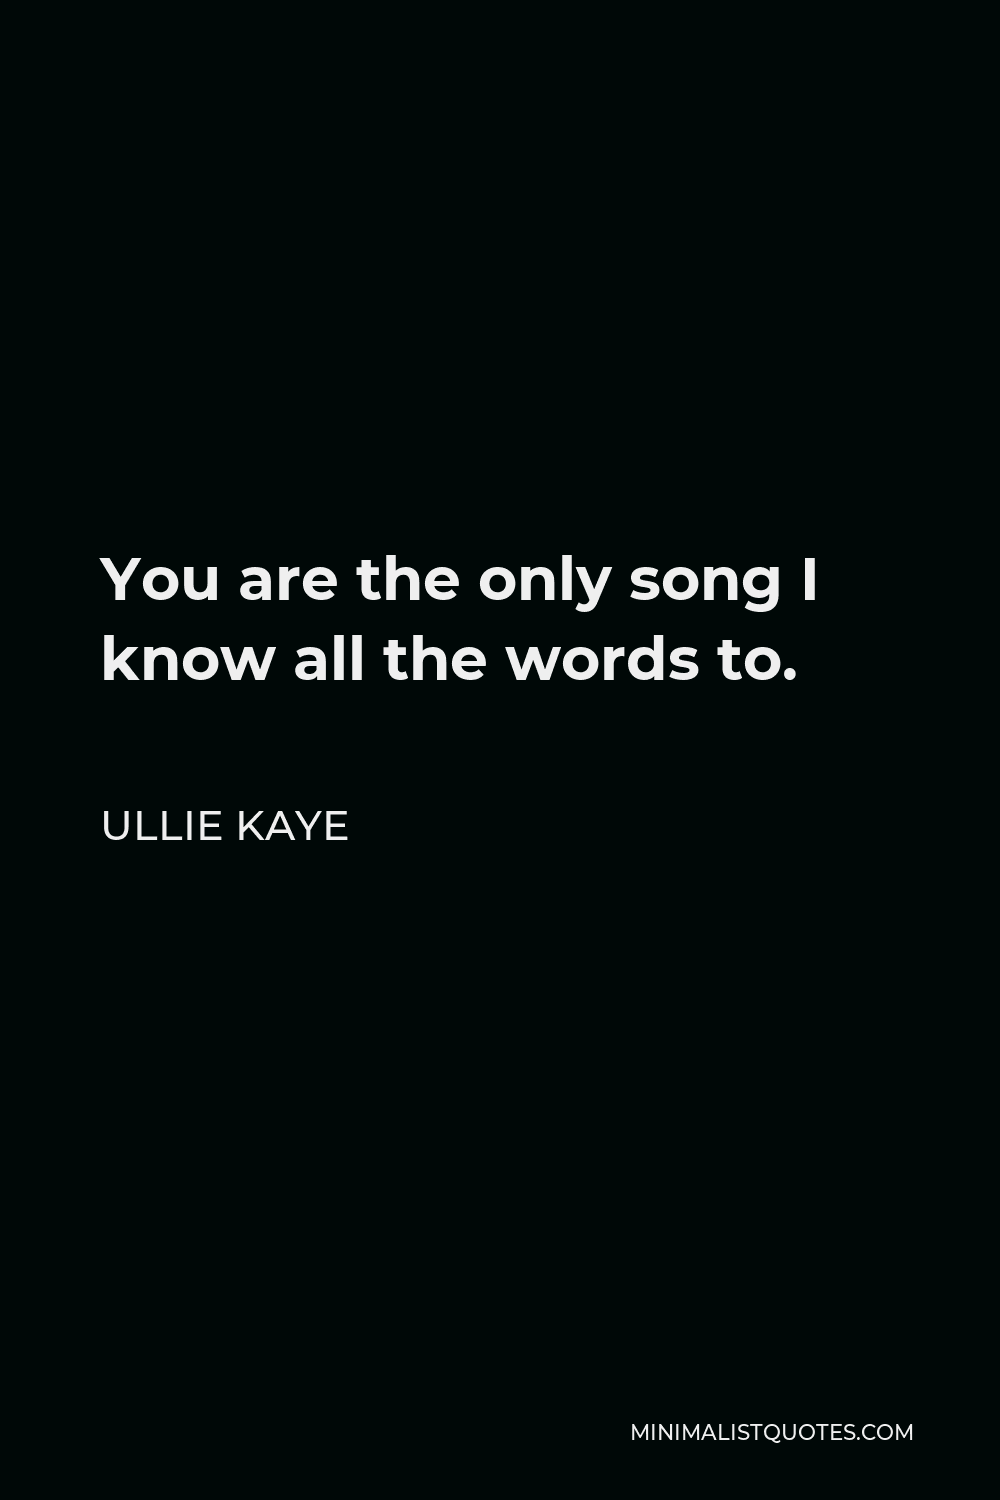 Ullie Kaye Quote - You are the only song I know all the words to.